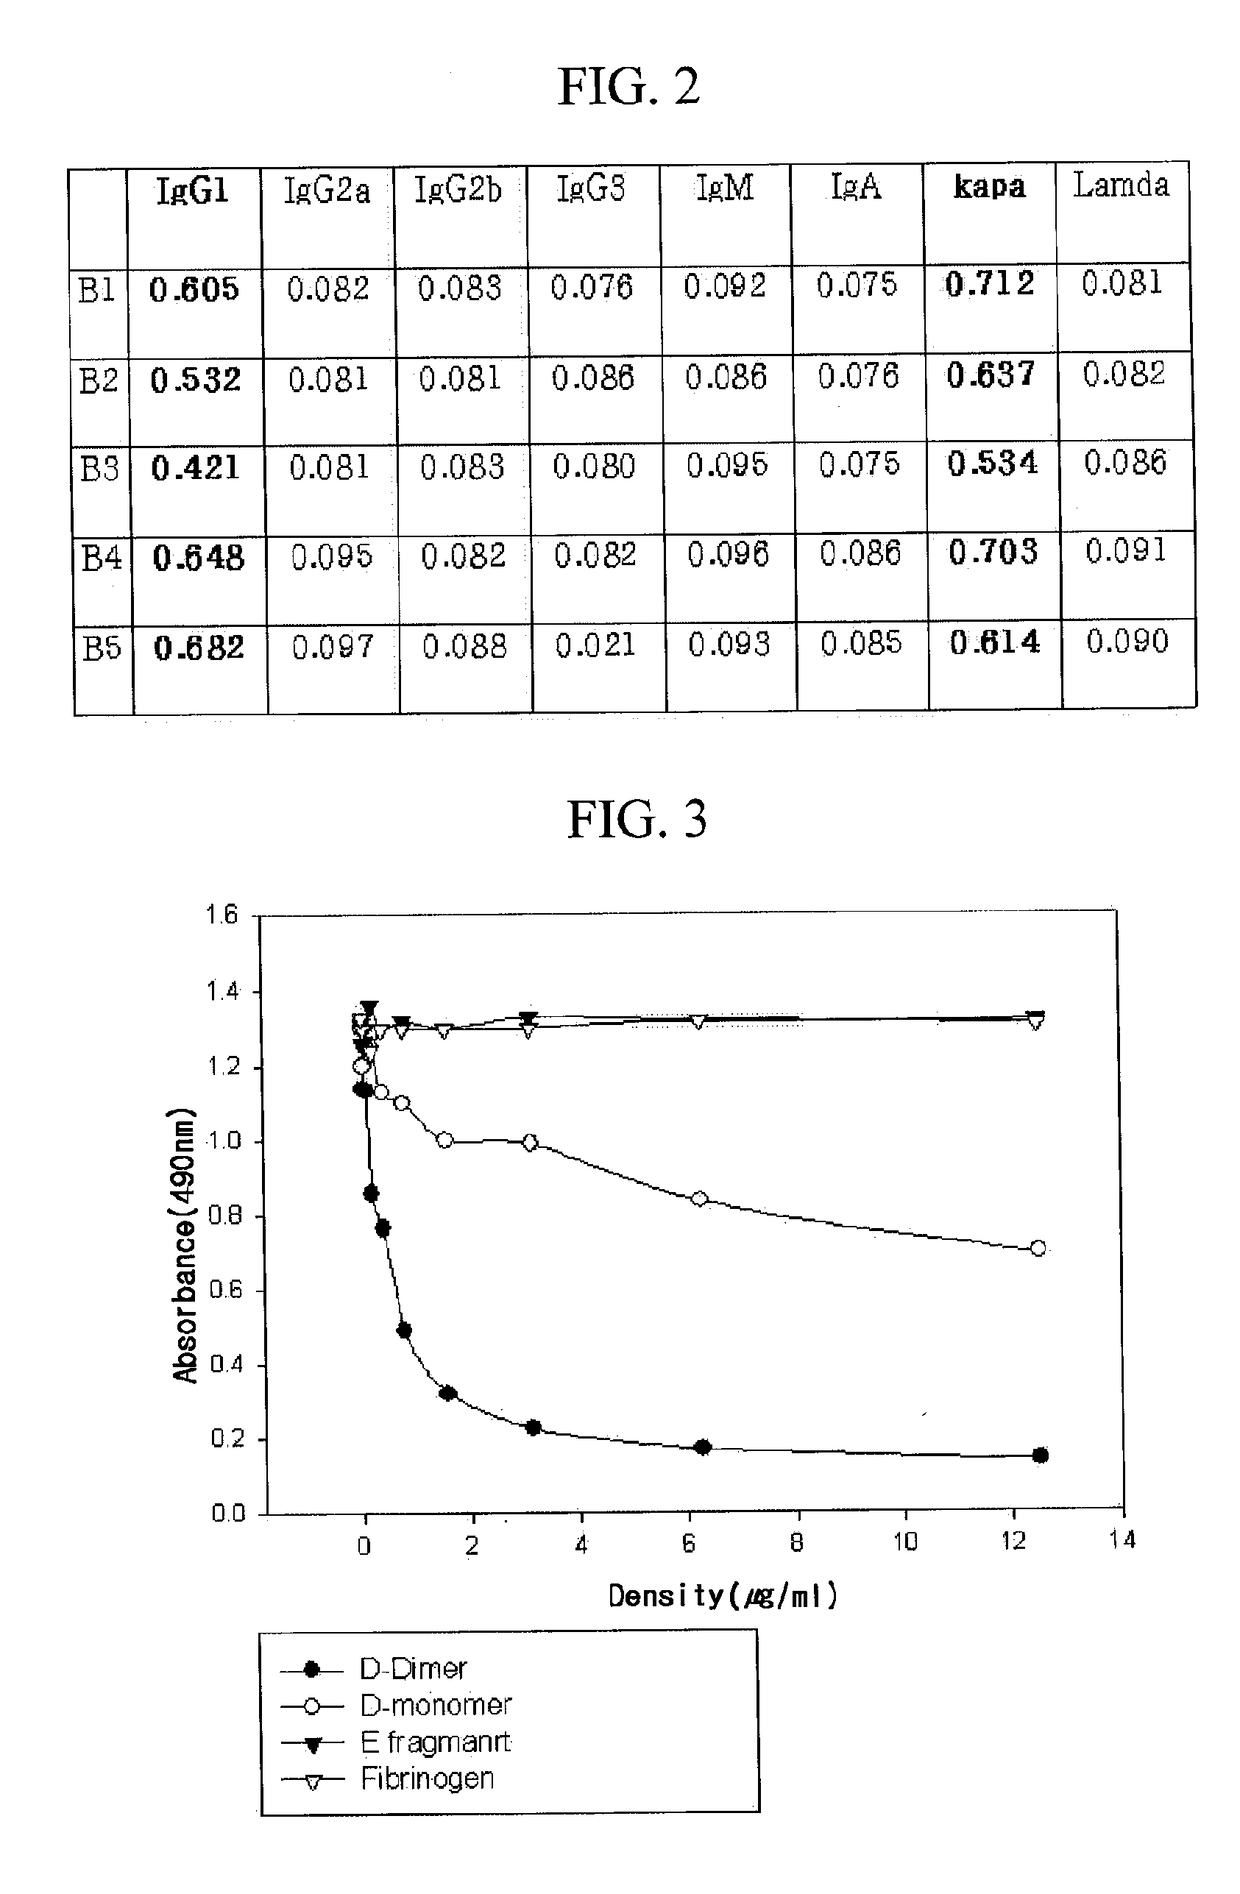 Monoclonal antibody against d-dimer and diagnosis agent for detecting d-dimer, crosslinked fibrin and its derivatives containing d-dimer by using the antibody